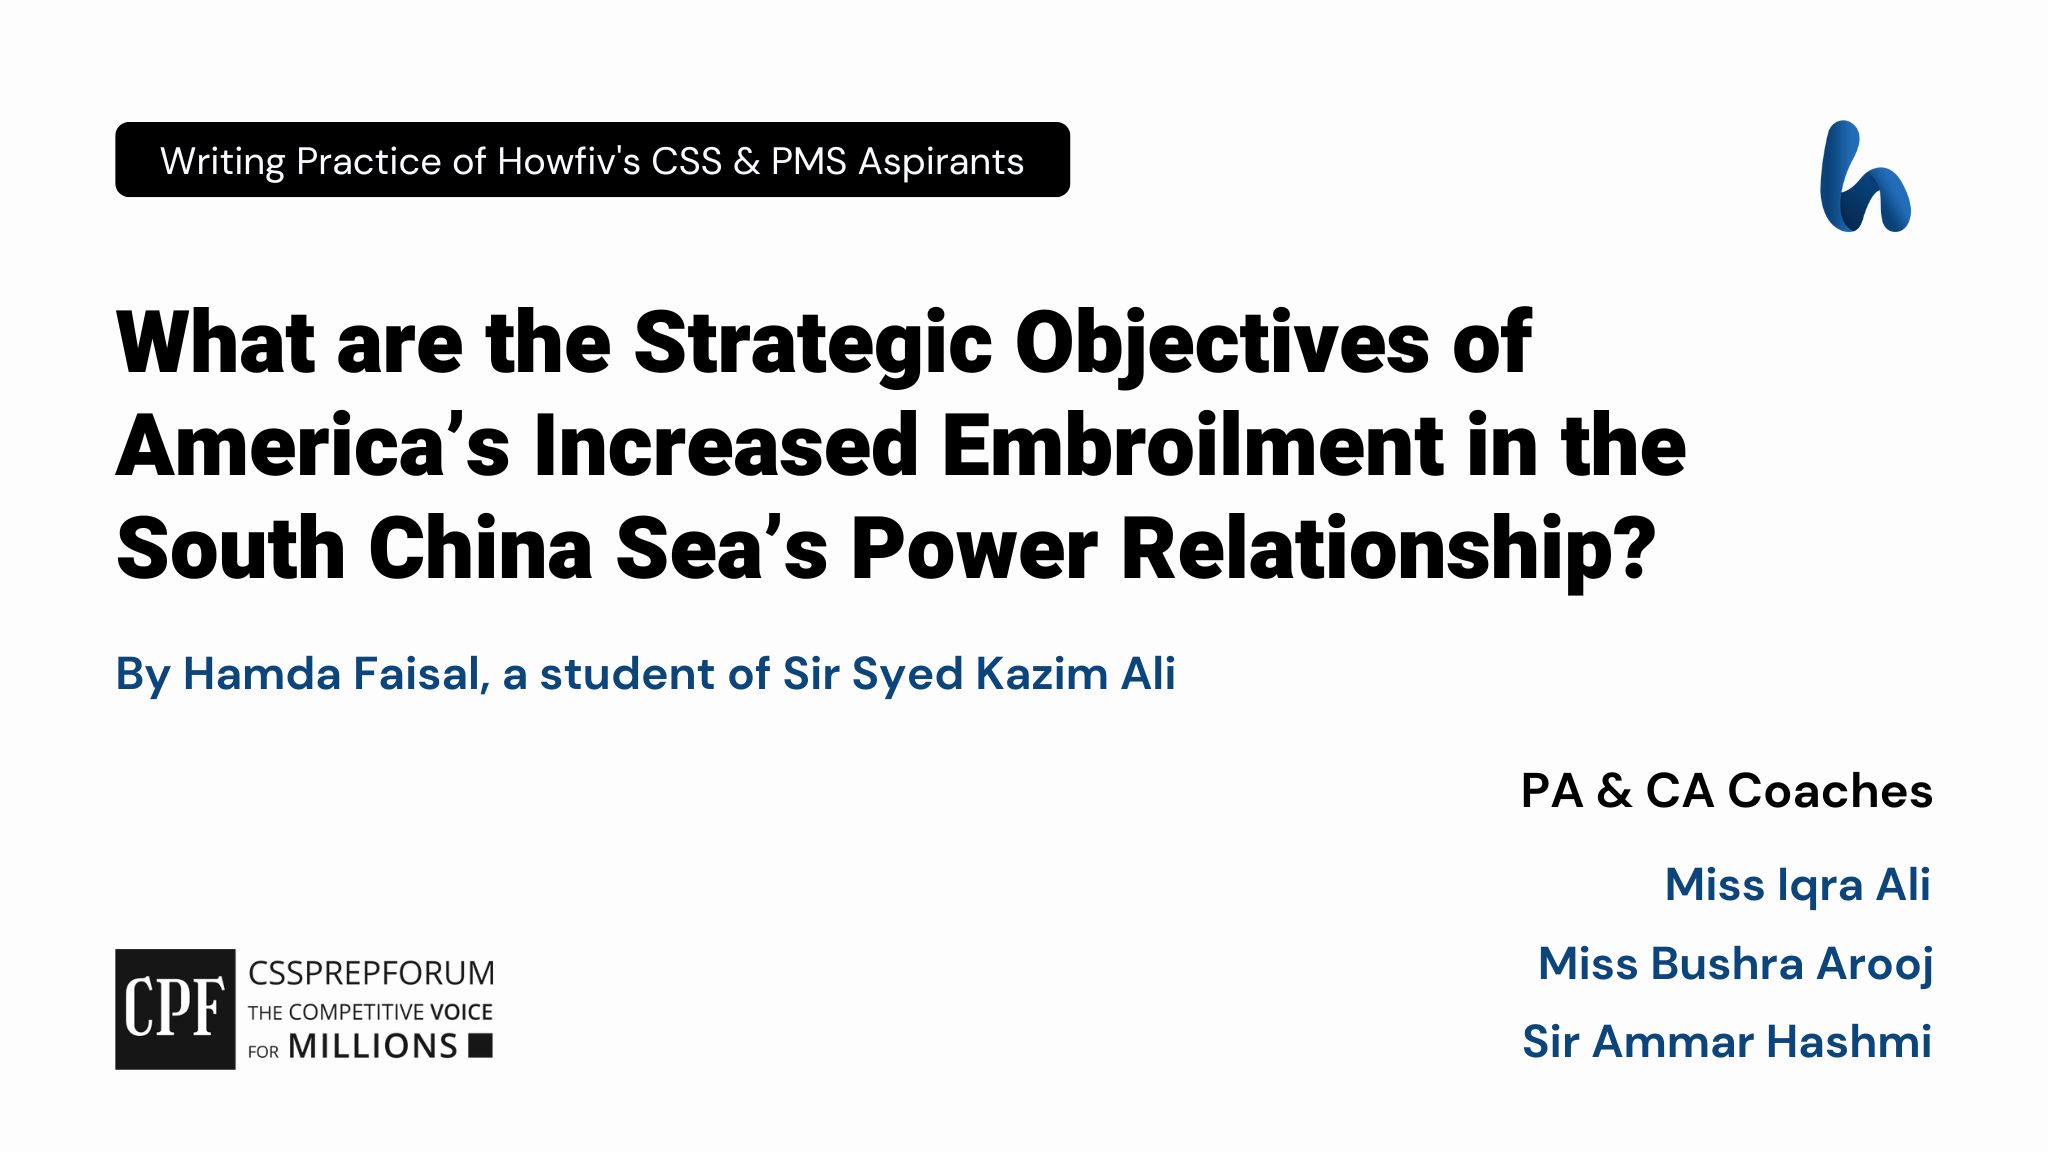 CSS Current Affairs article | America’s Increased Embroilment in the South China Sea’s Power Relationship | is written by Hamda Faisal under the supervision of Sir Ammar Hashmi...